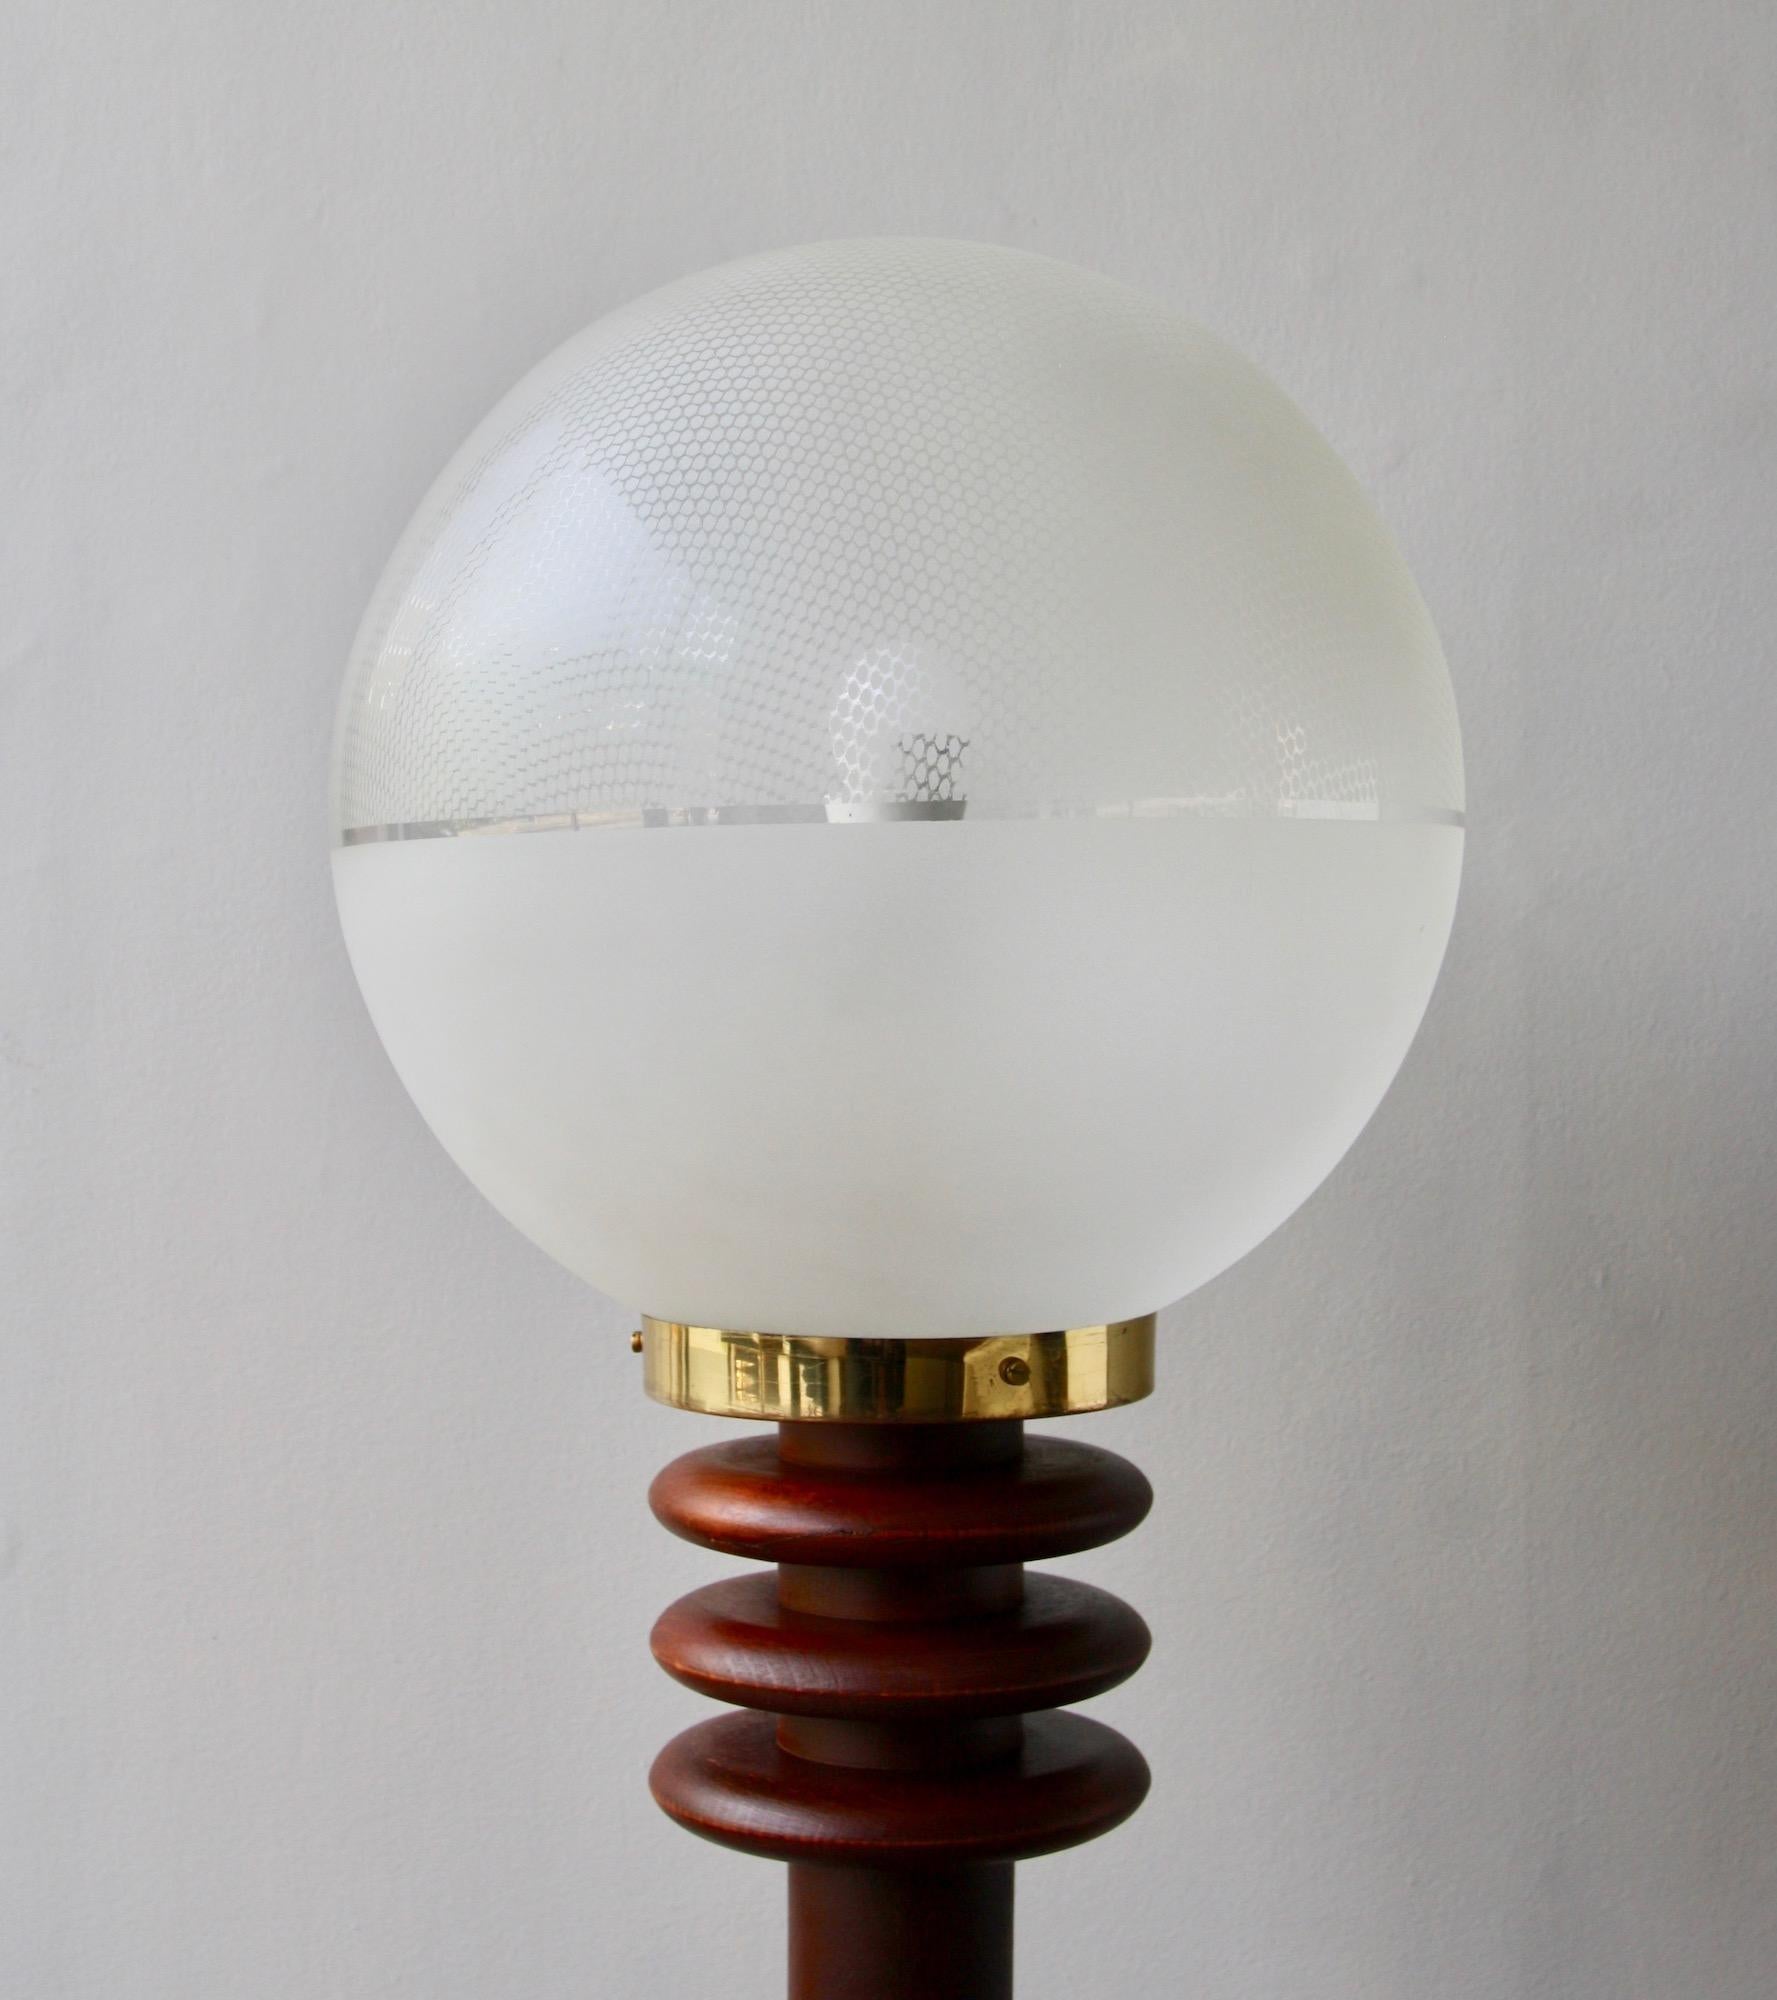 A large vintage Czech floor or table light in turned wood and mouth-blown etched glass, designed and made by Antonín Hepnar, circa 1975.
The materials traditionally associated with the Czech Republic are glass and porcelain. However, Hepar has